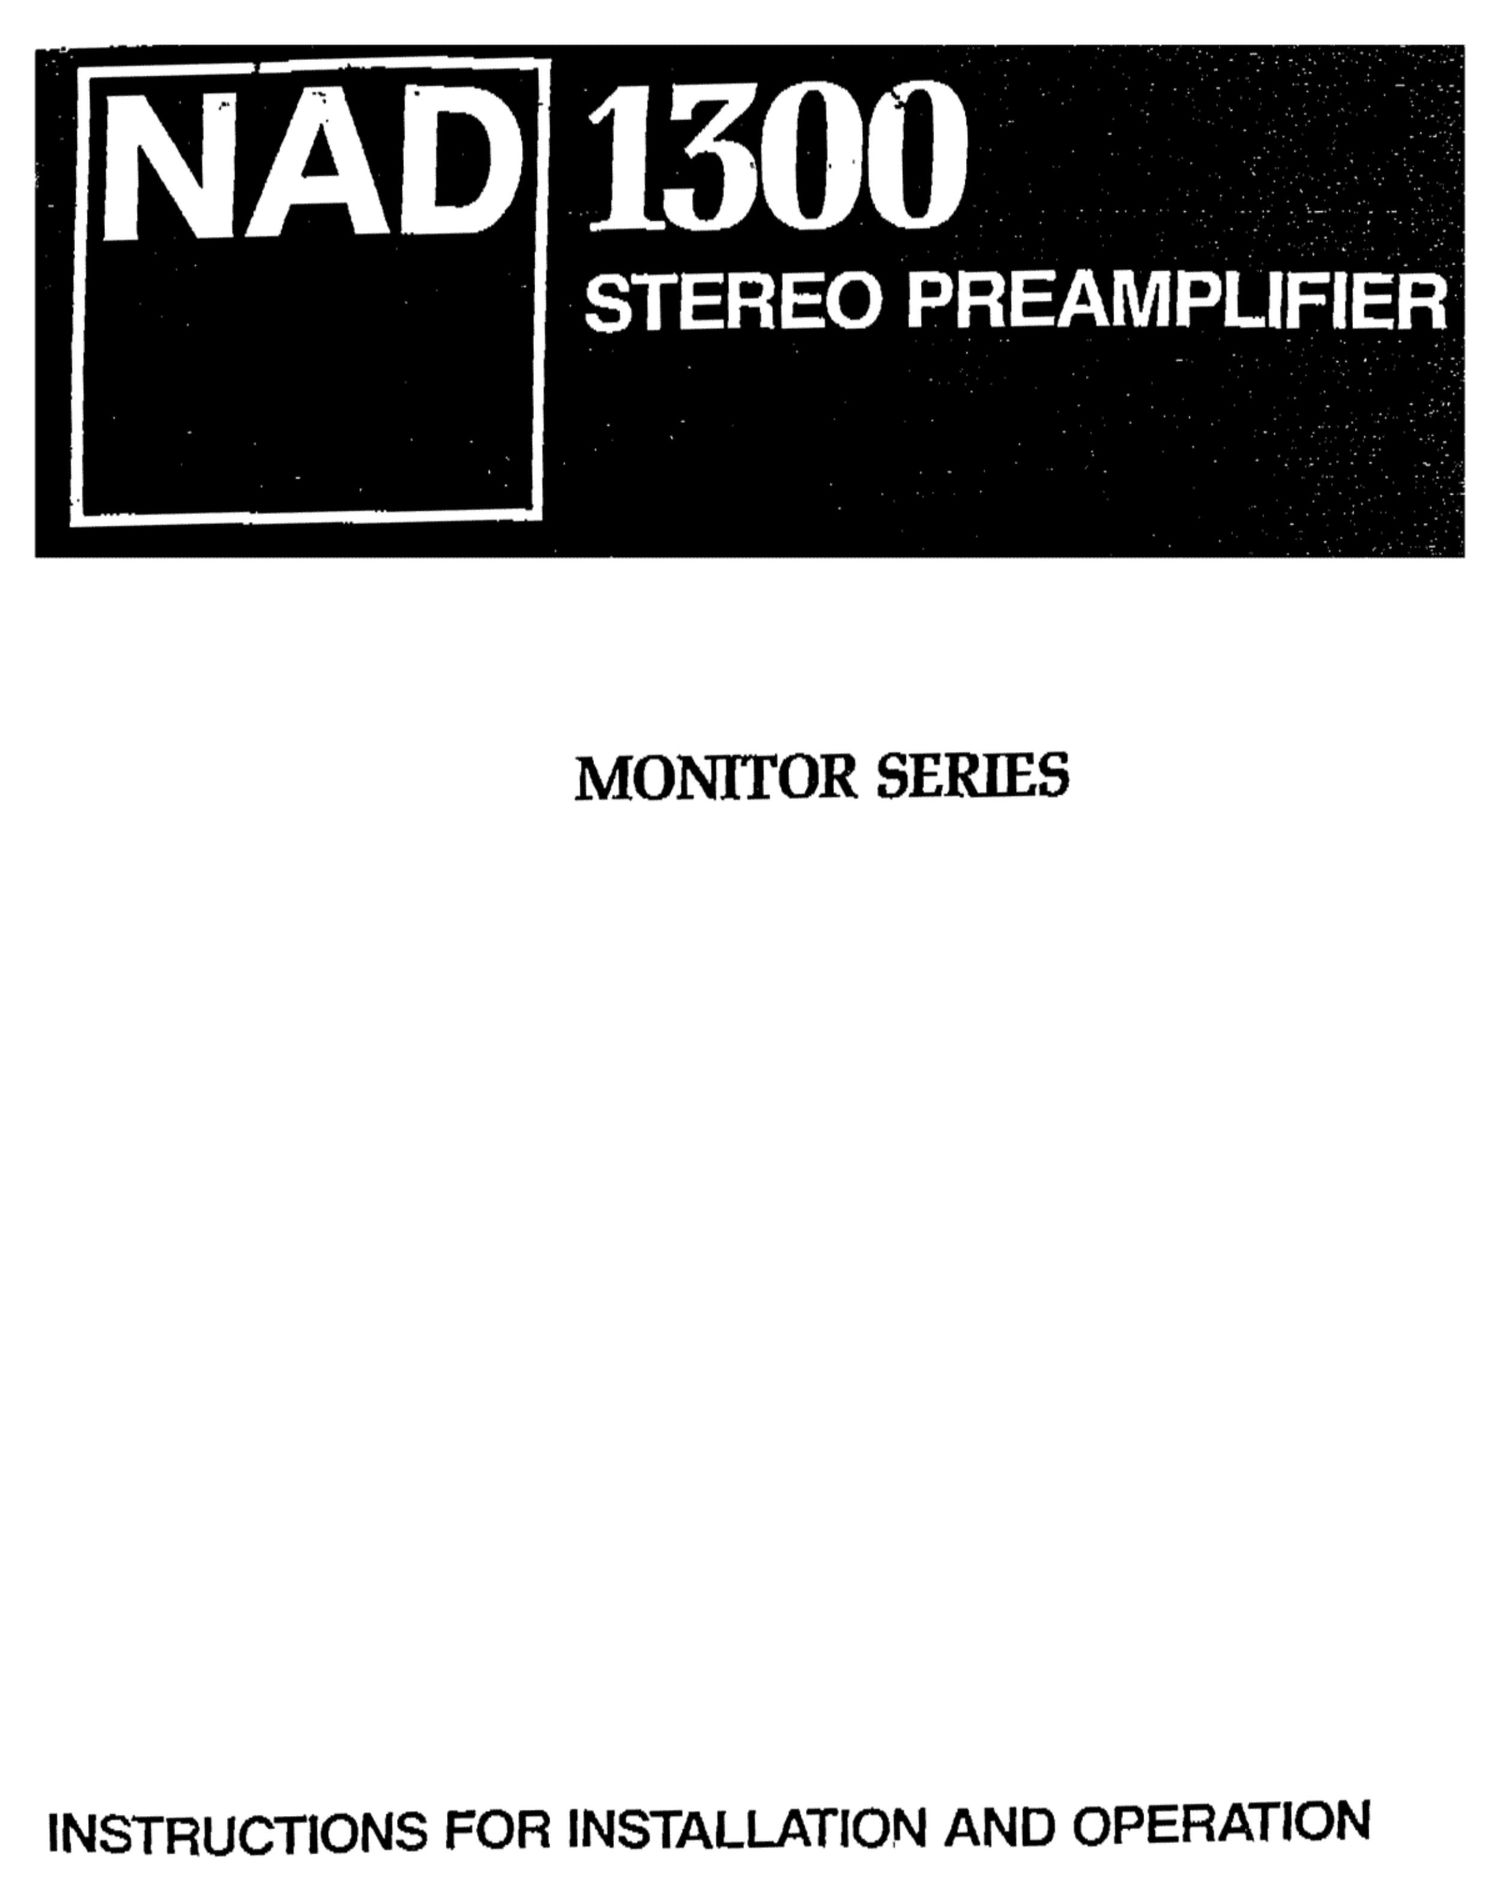 Nad 1300 Owners Manual